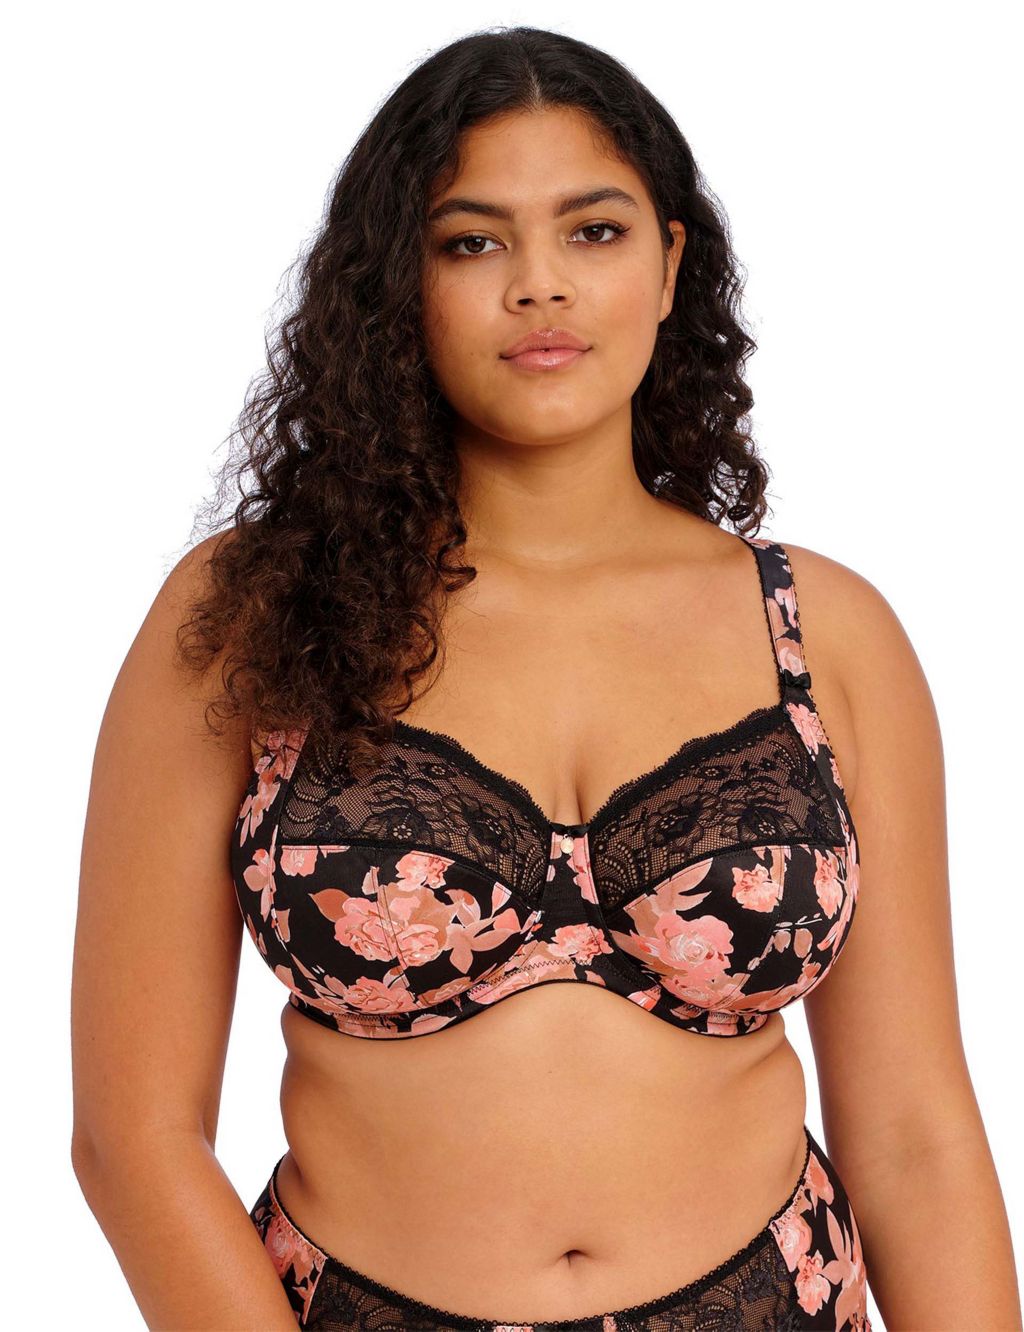 Morgan Floral Wired Extra Support Bra Set image 3